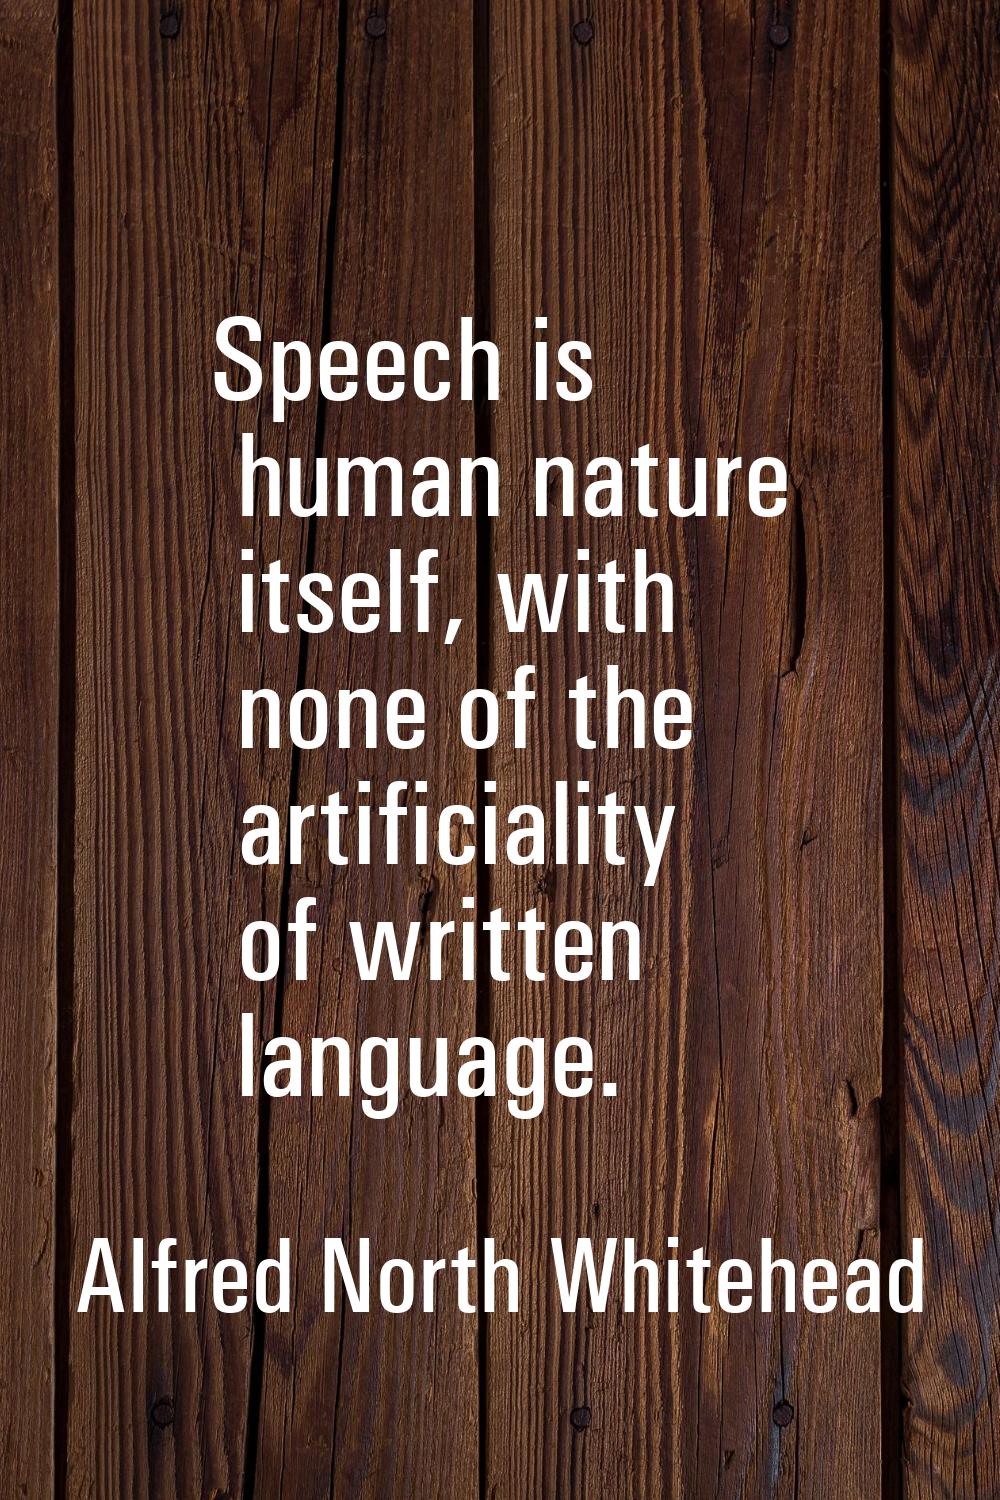 Speech is human nature itself, with none of the artificiality of written language.